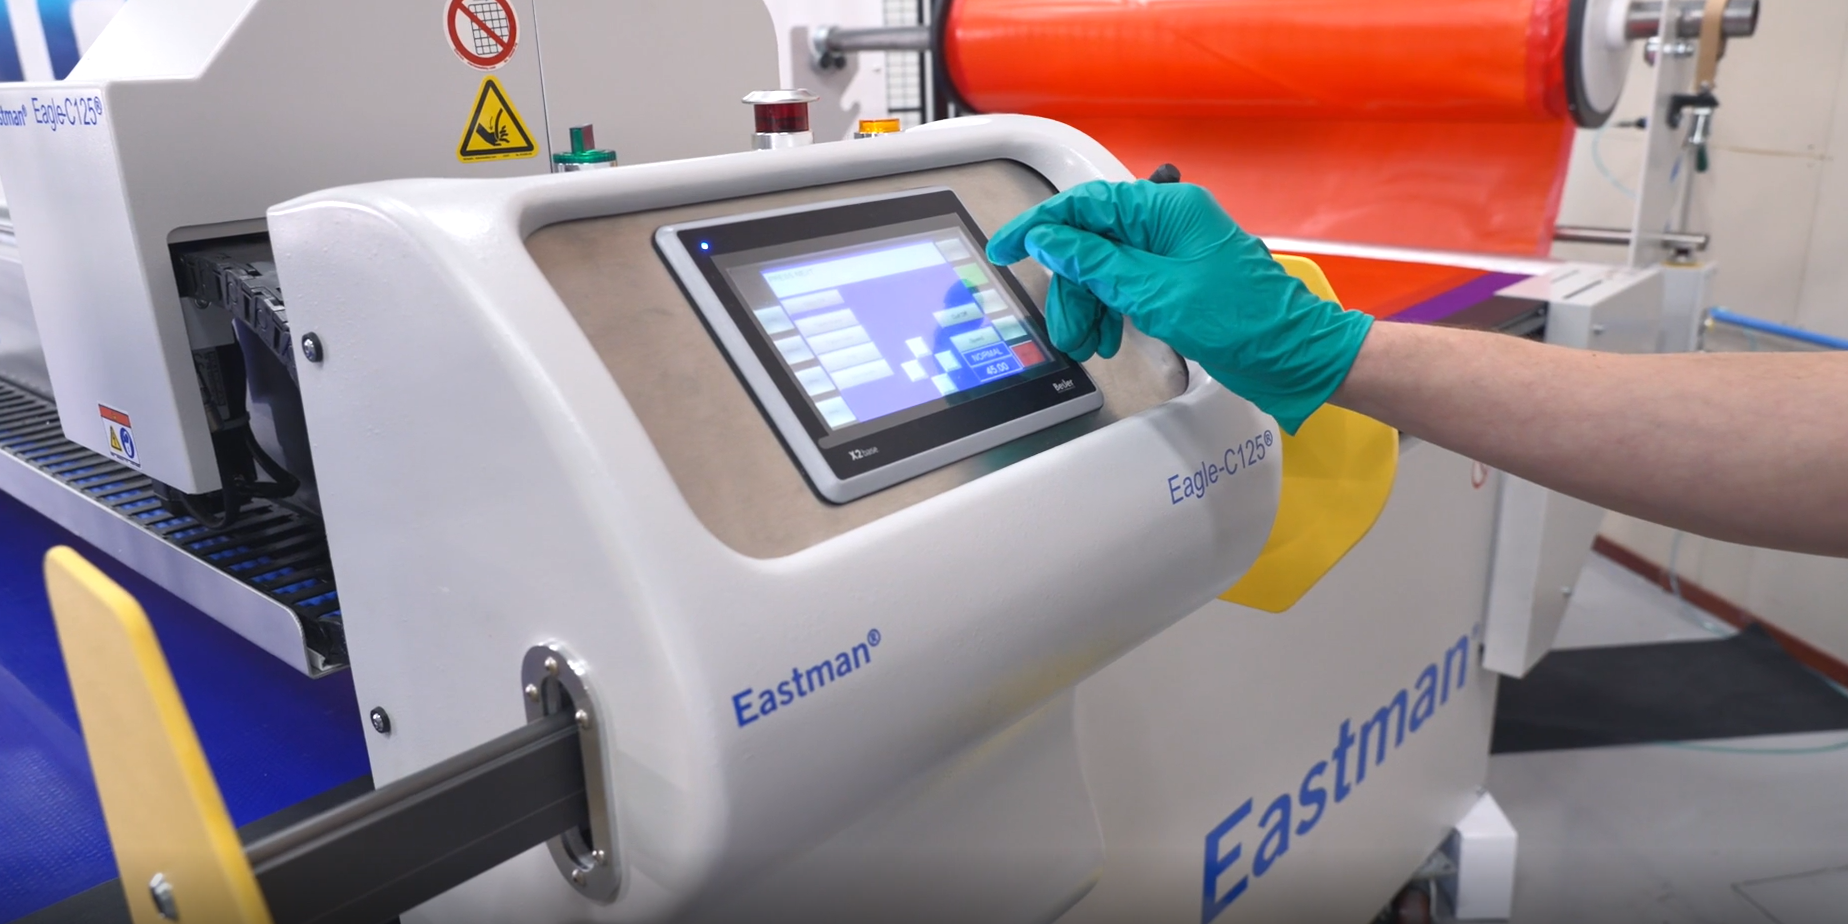 Eastman Machine Appointed Airborne Preferred Reselling Partner